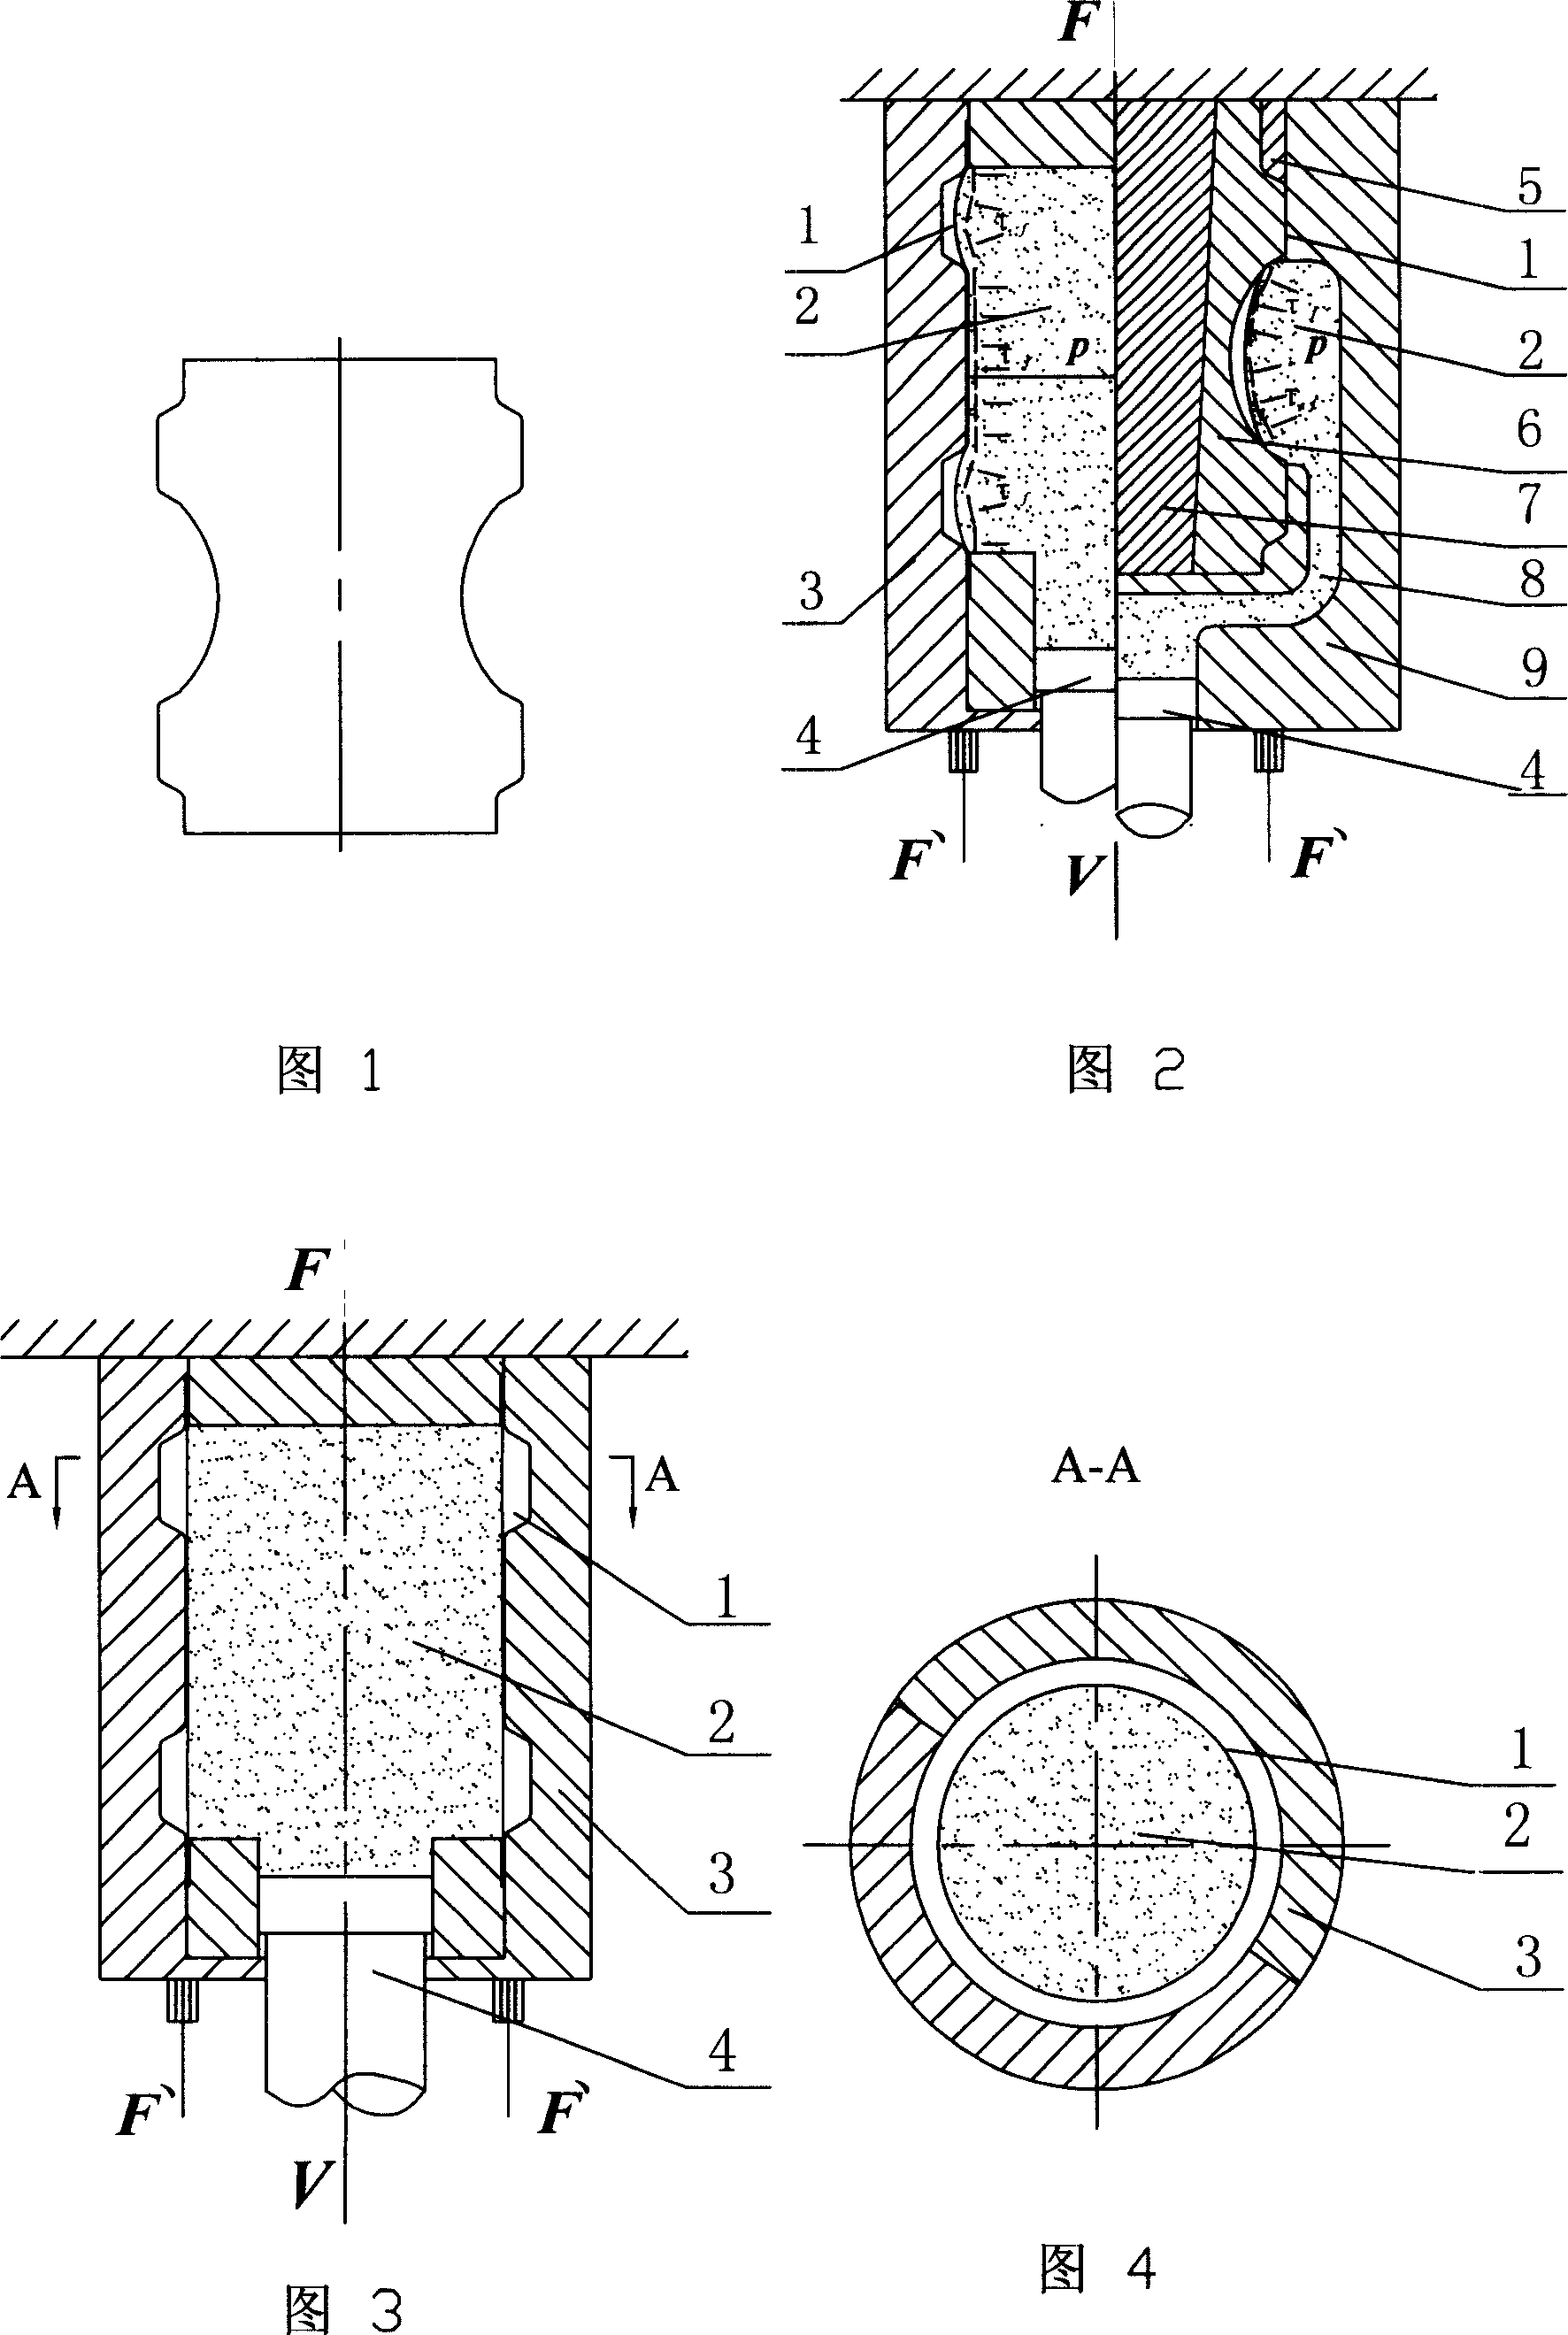 Internal and external pressurization compound forming method for axisymmetric thin-wall special-shaped curved work piece with large section surface